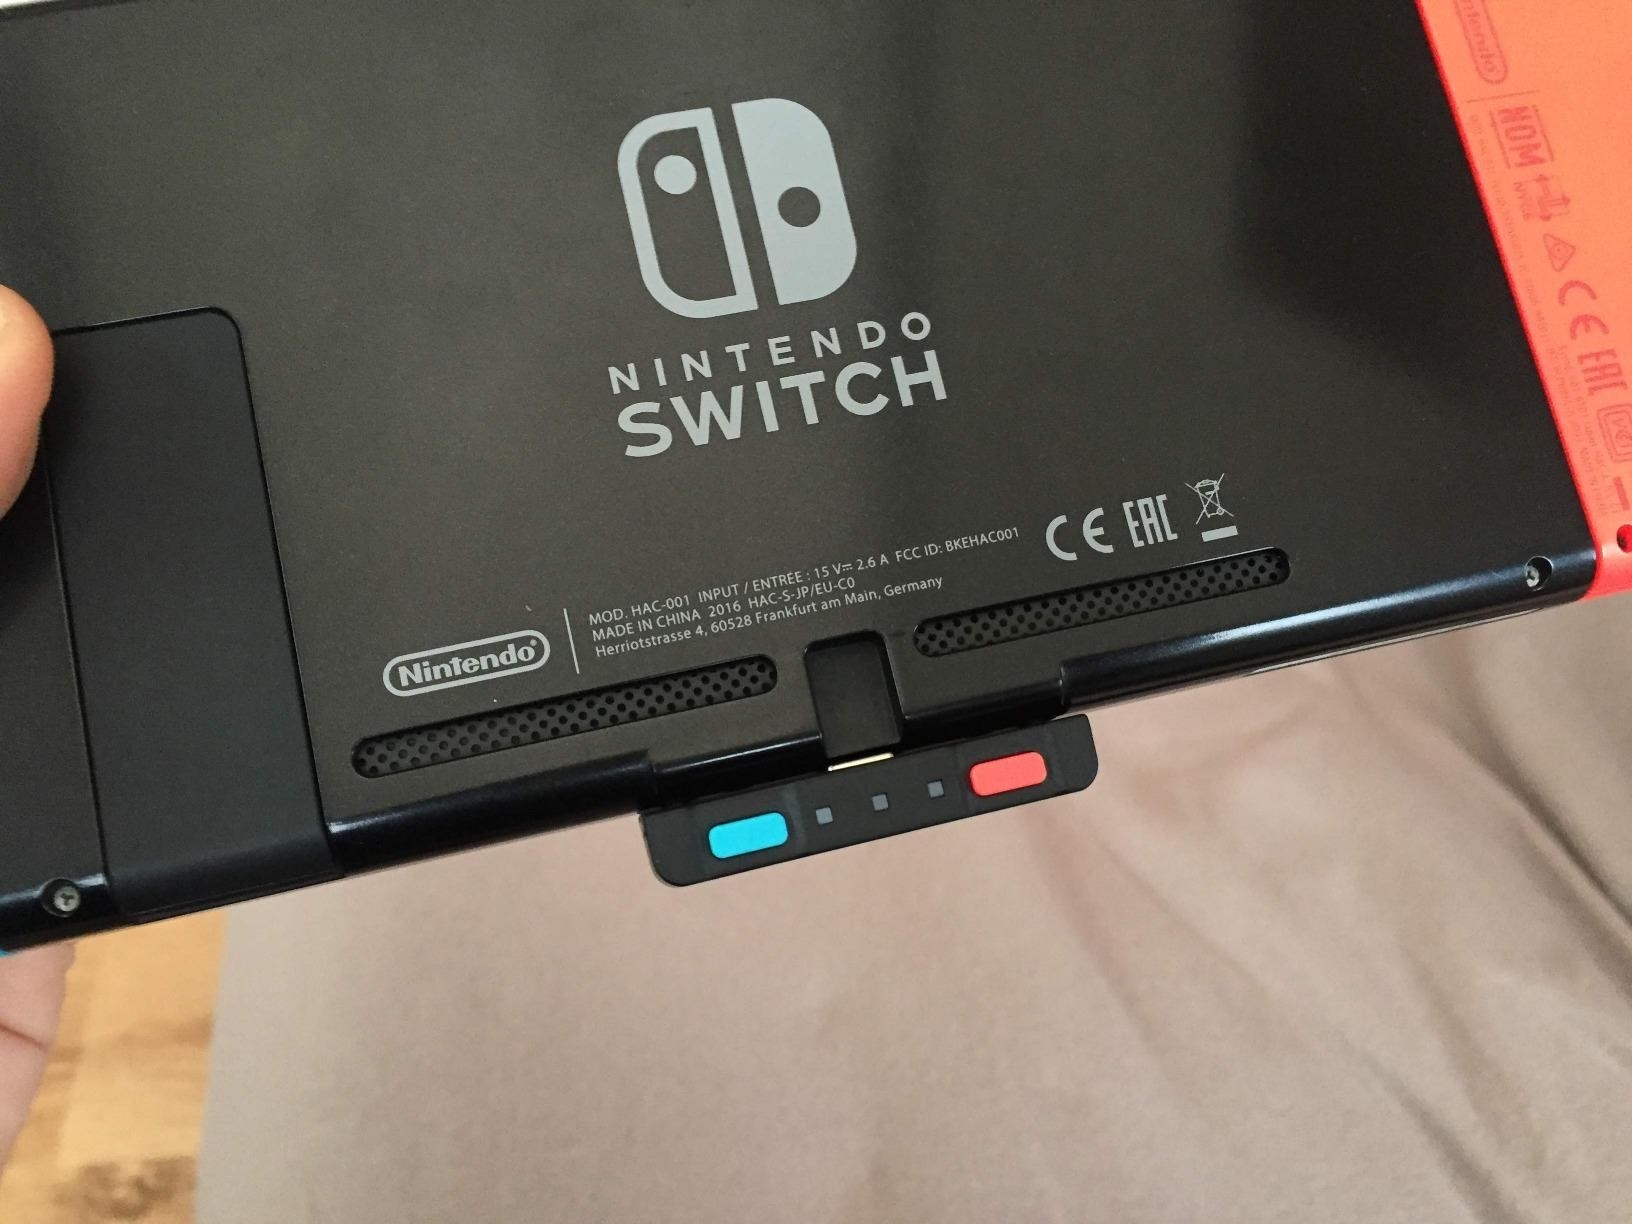 Bluetooth audio transmitter connected to bottom of Nintendo Switch